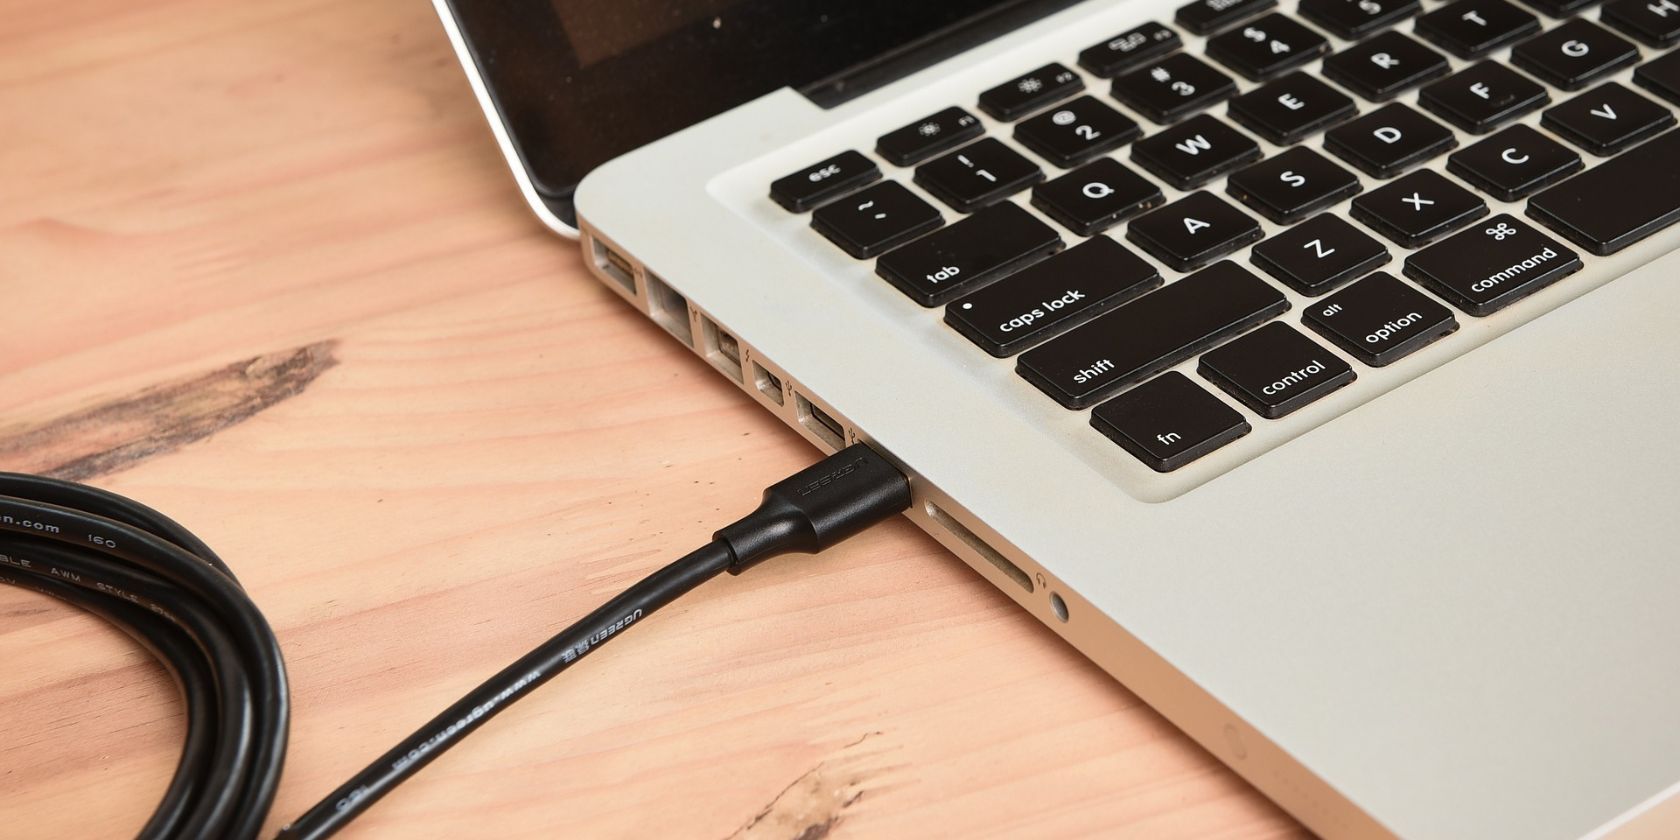 USB cable plugged into a laptop's USB port